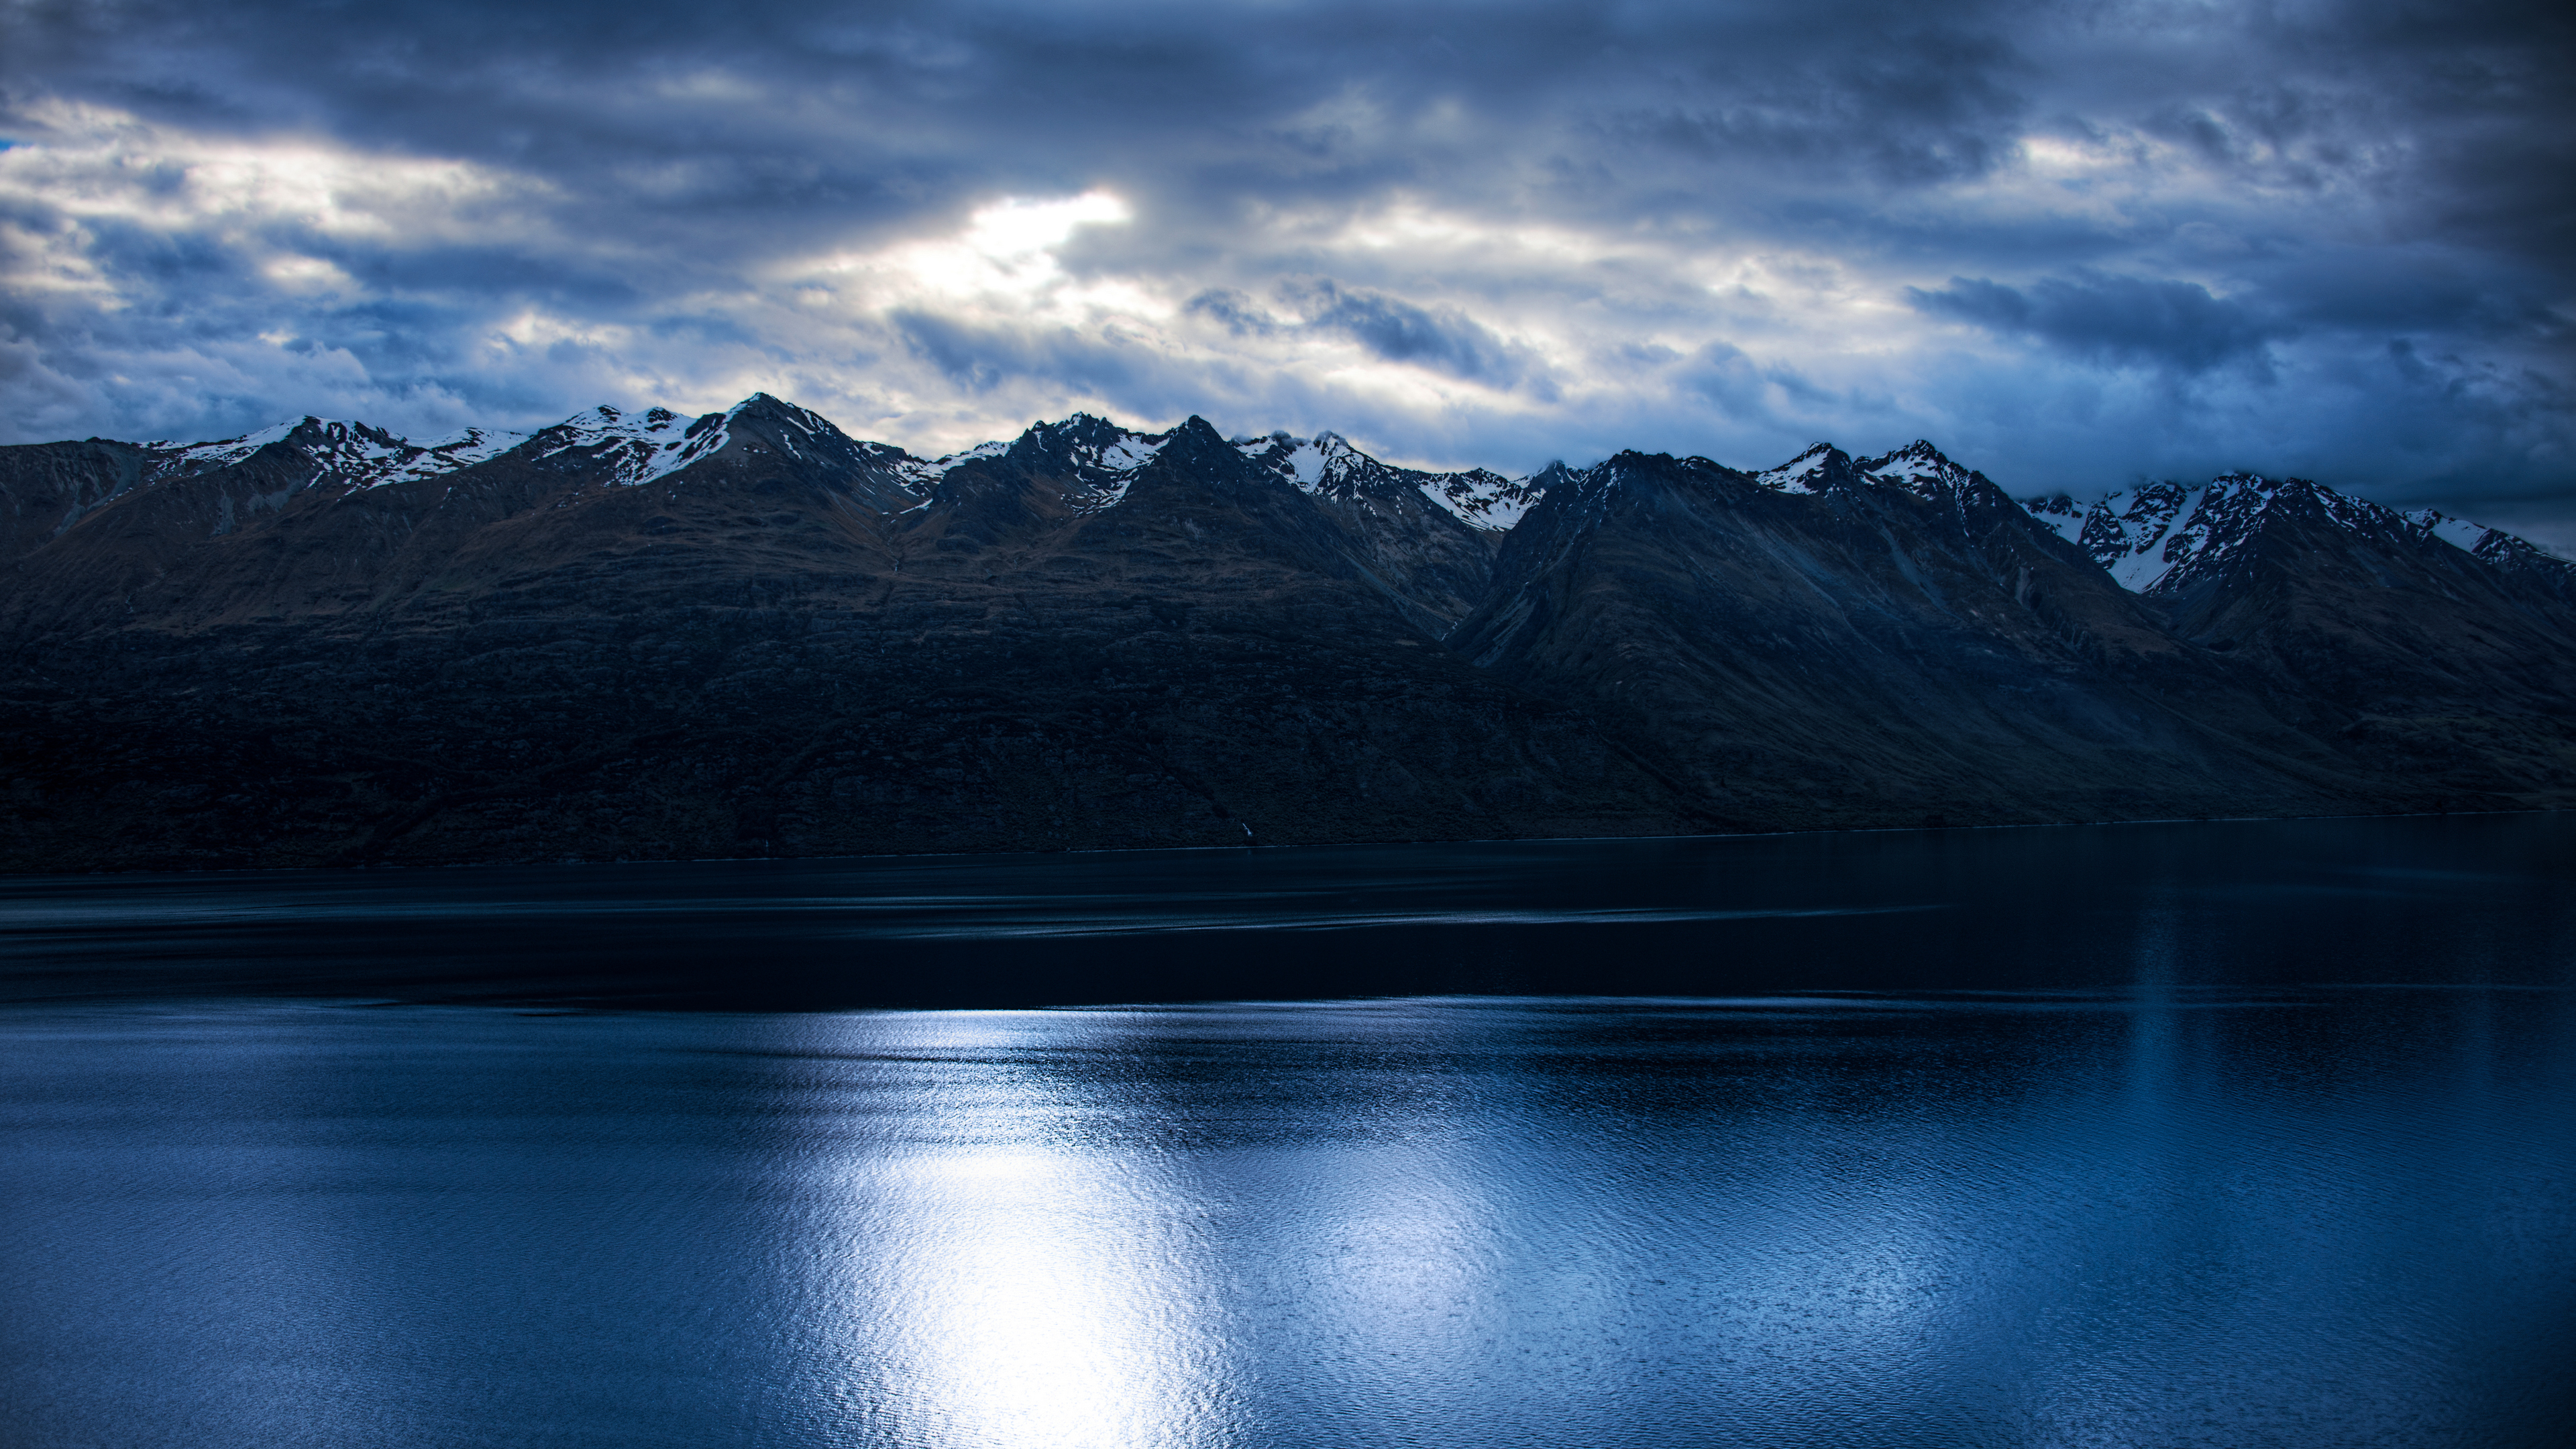 General 3840x2160 landscape 4K New Zealand nature water mountains snow clouds sky